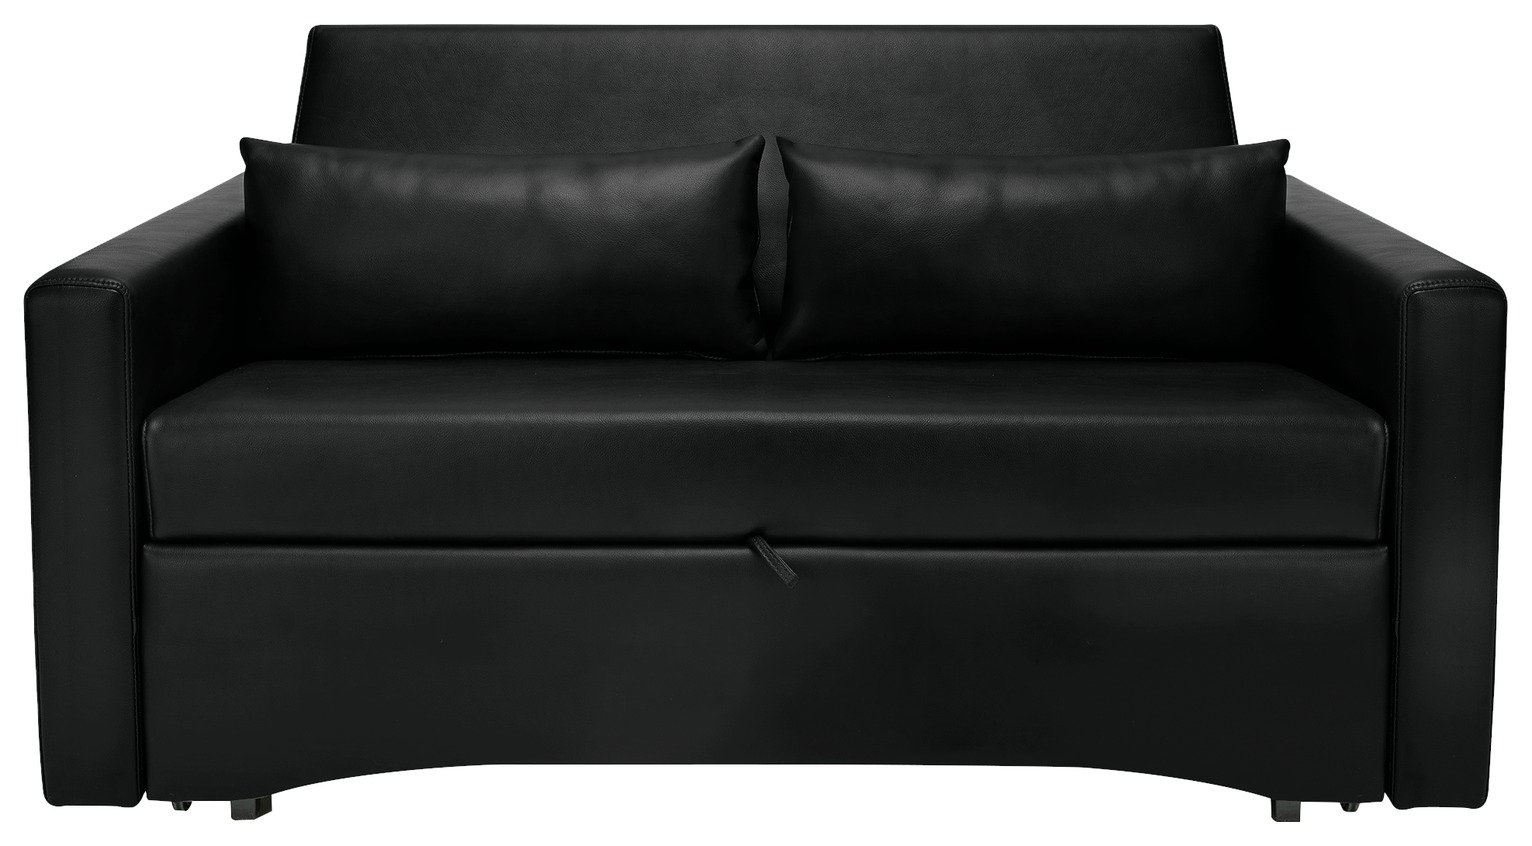 Argos Home Reagan 2 Seater Faux Leather Sofa Bed - Black